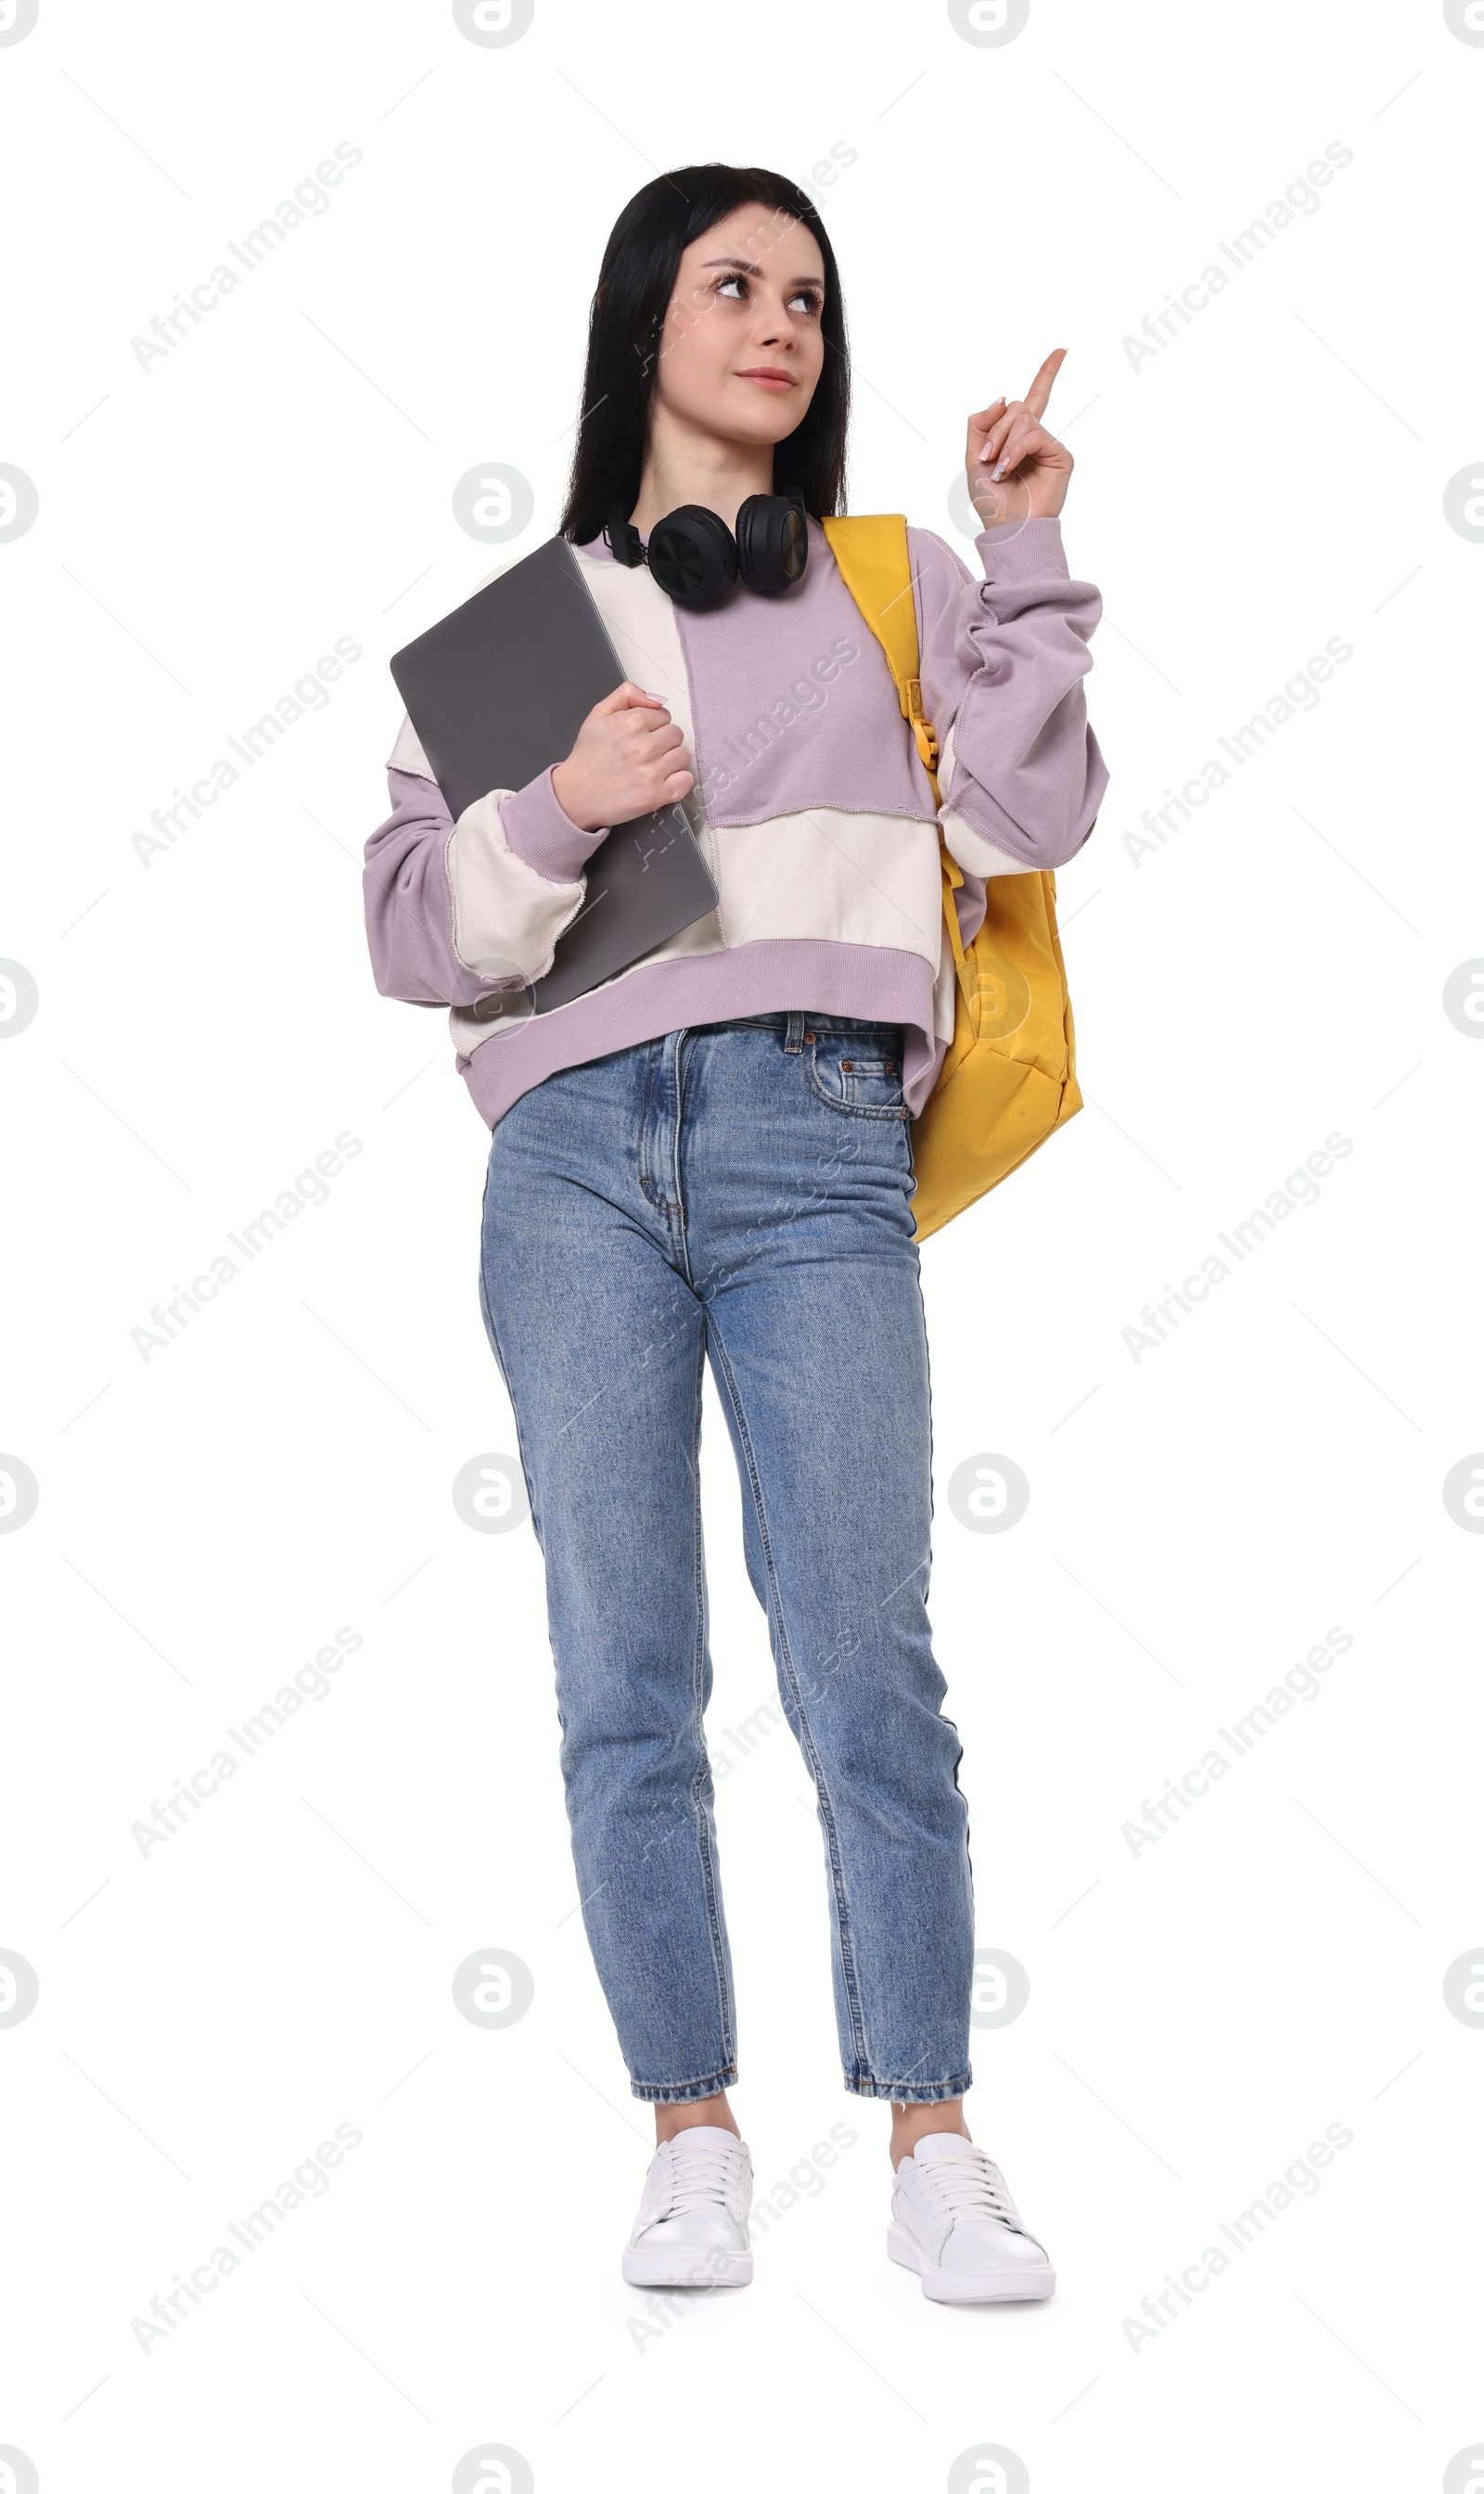 Photo of Student with backpack and laptop on white background